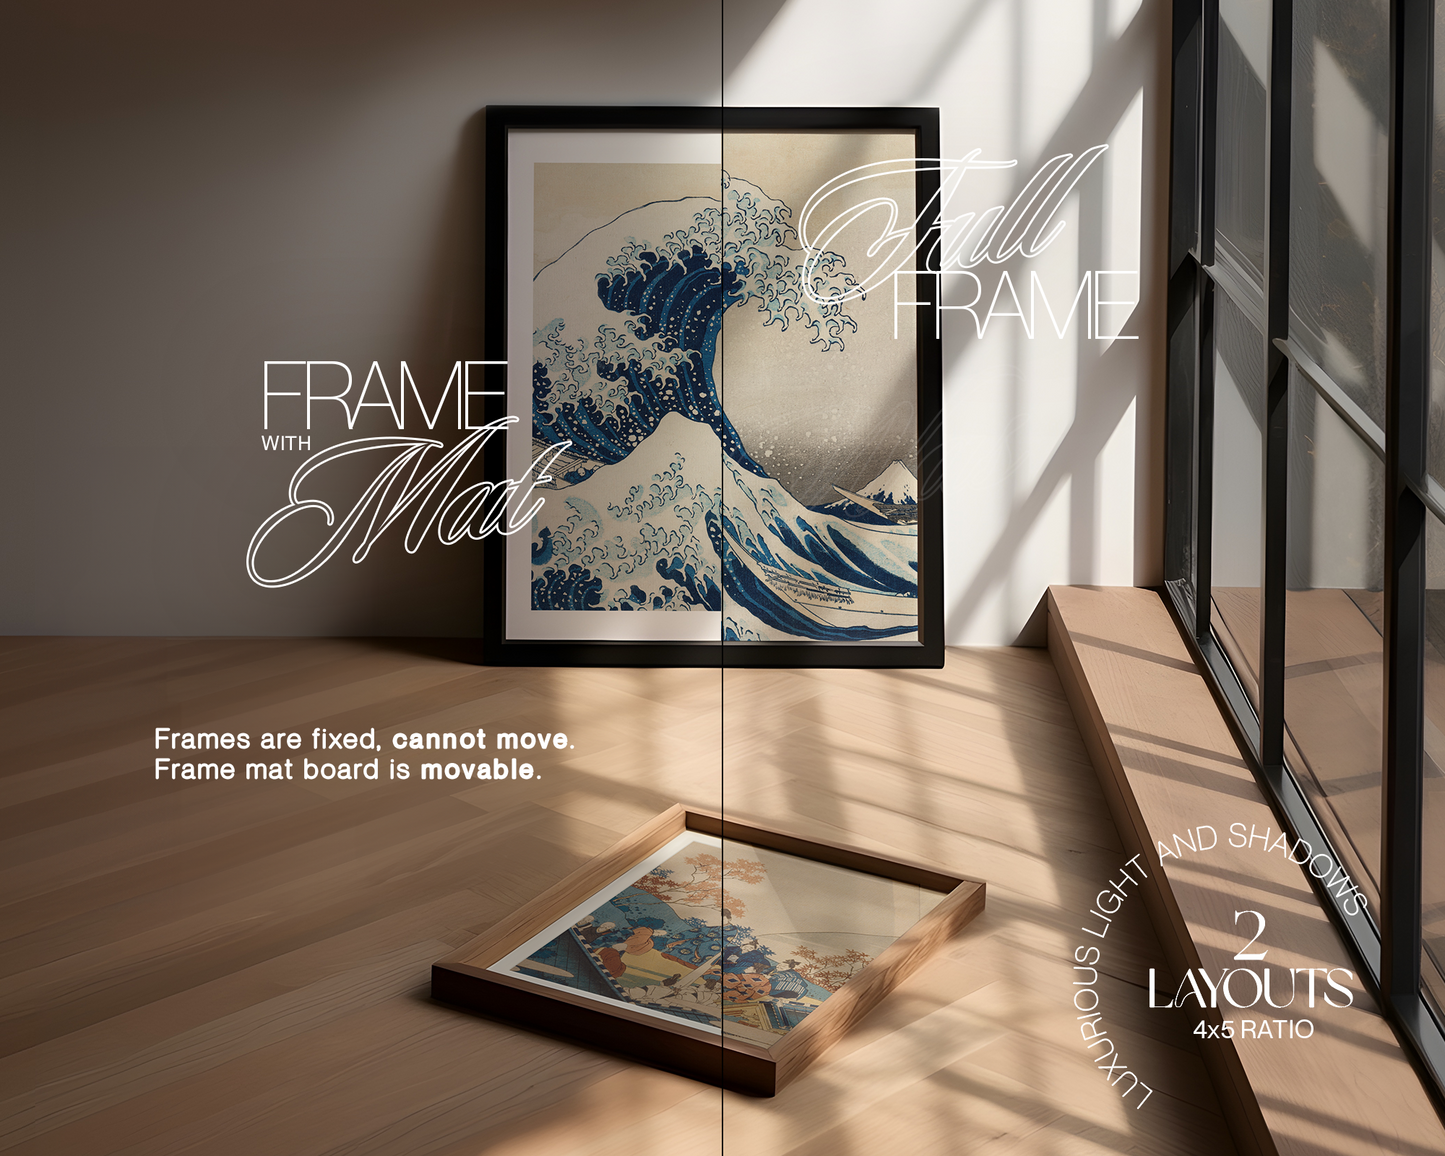 Two 4x5 Frames with Moody Light  Mockup